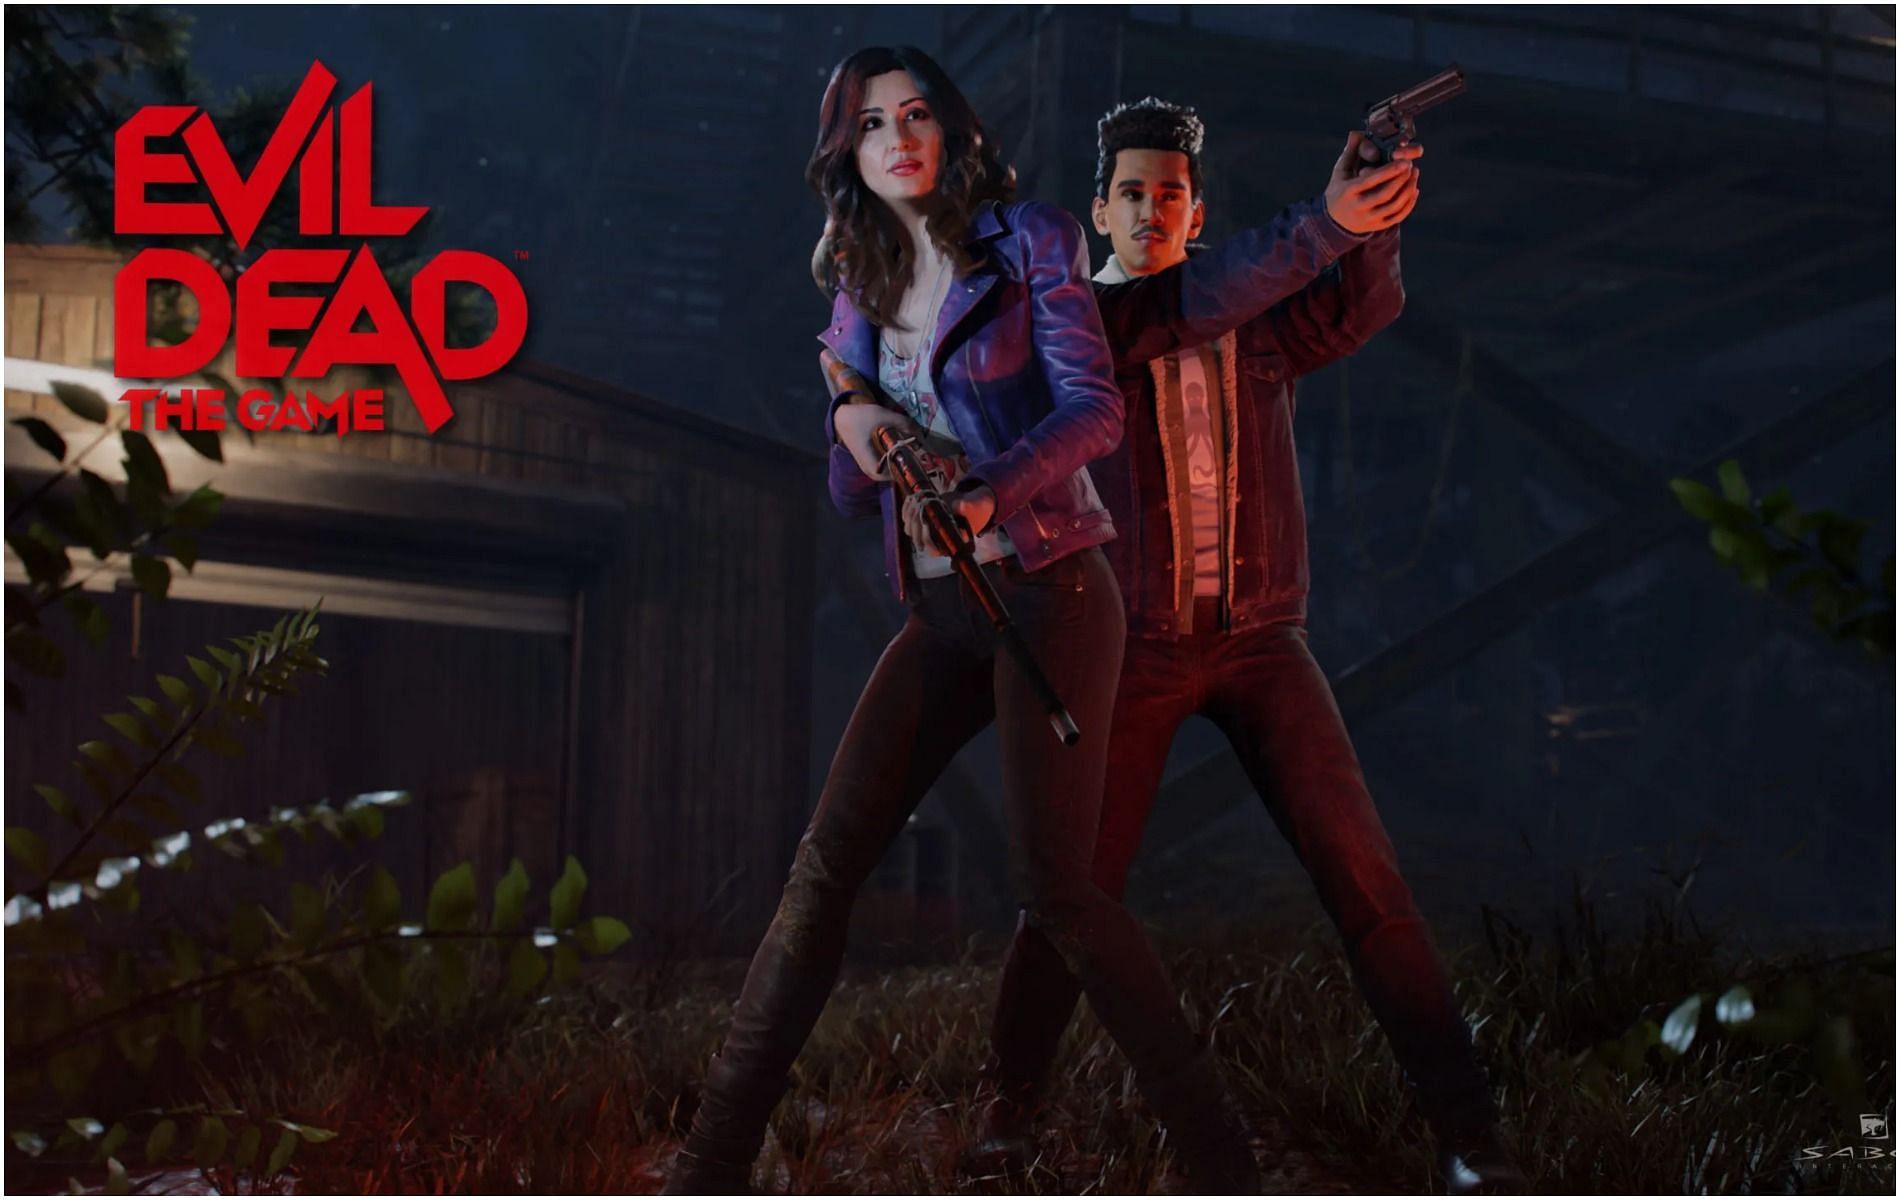 Evil Dead: The Game has 45 trophies to unlock, and here is what it takes to unlock them all (Image via Saber Interactive)